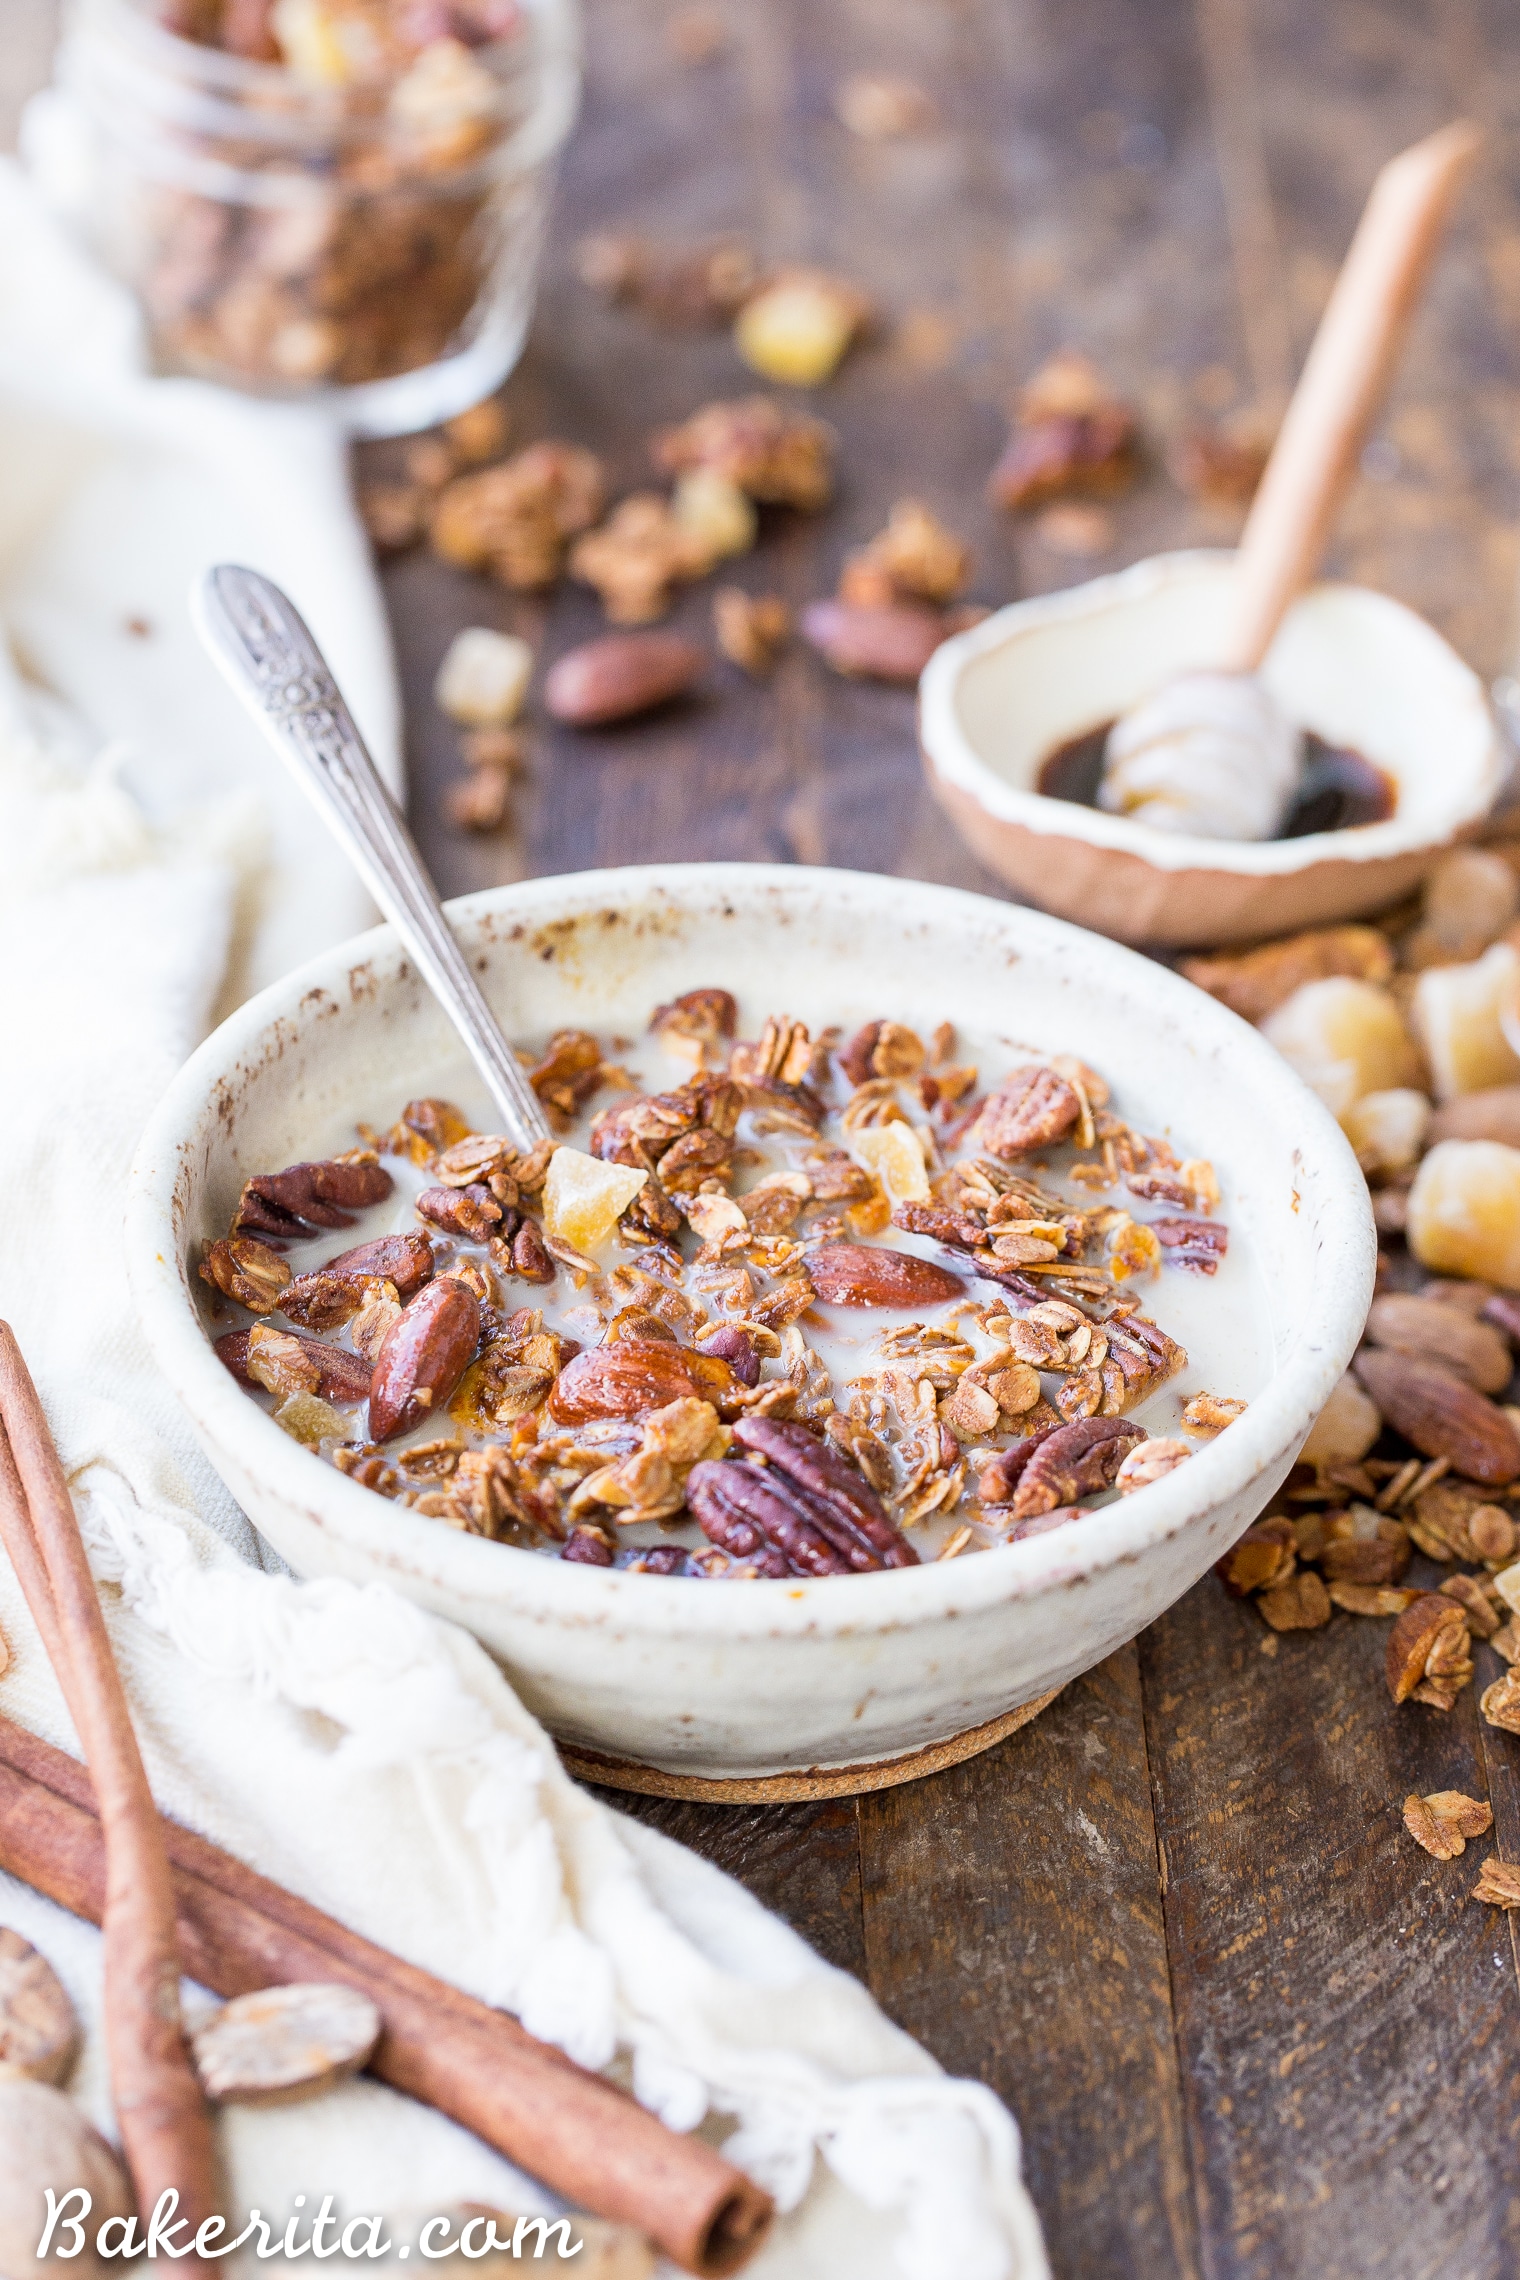 This Gingerbread Granola is crunchy & full of clusters, with loads of warm gingerbread spices, molasses, and bits of chewy crystallized ginger. This gluten-free and vegan breakfast is perfect for breakfast, or to package up in a cute jar and gift as a gift!